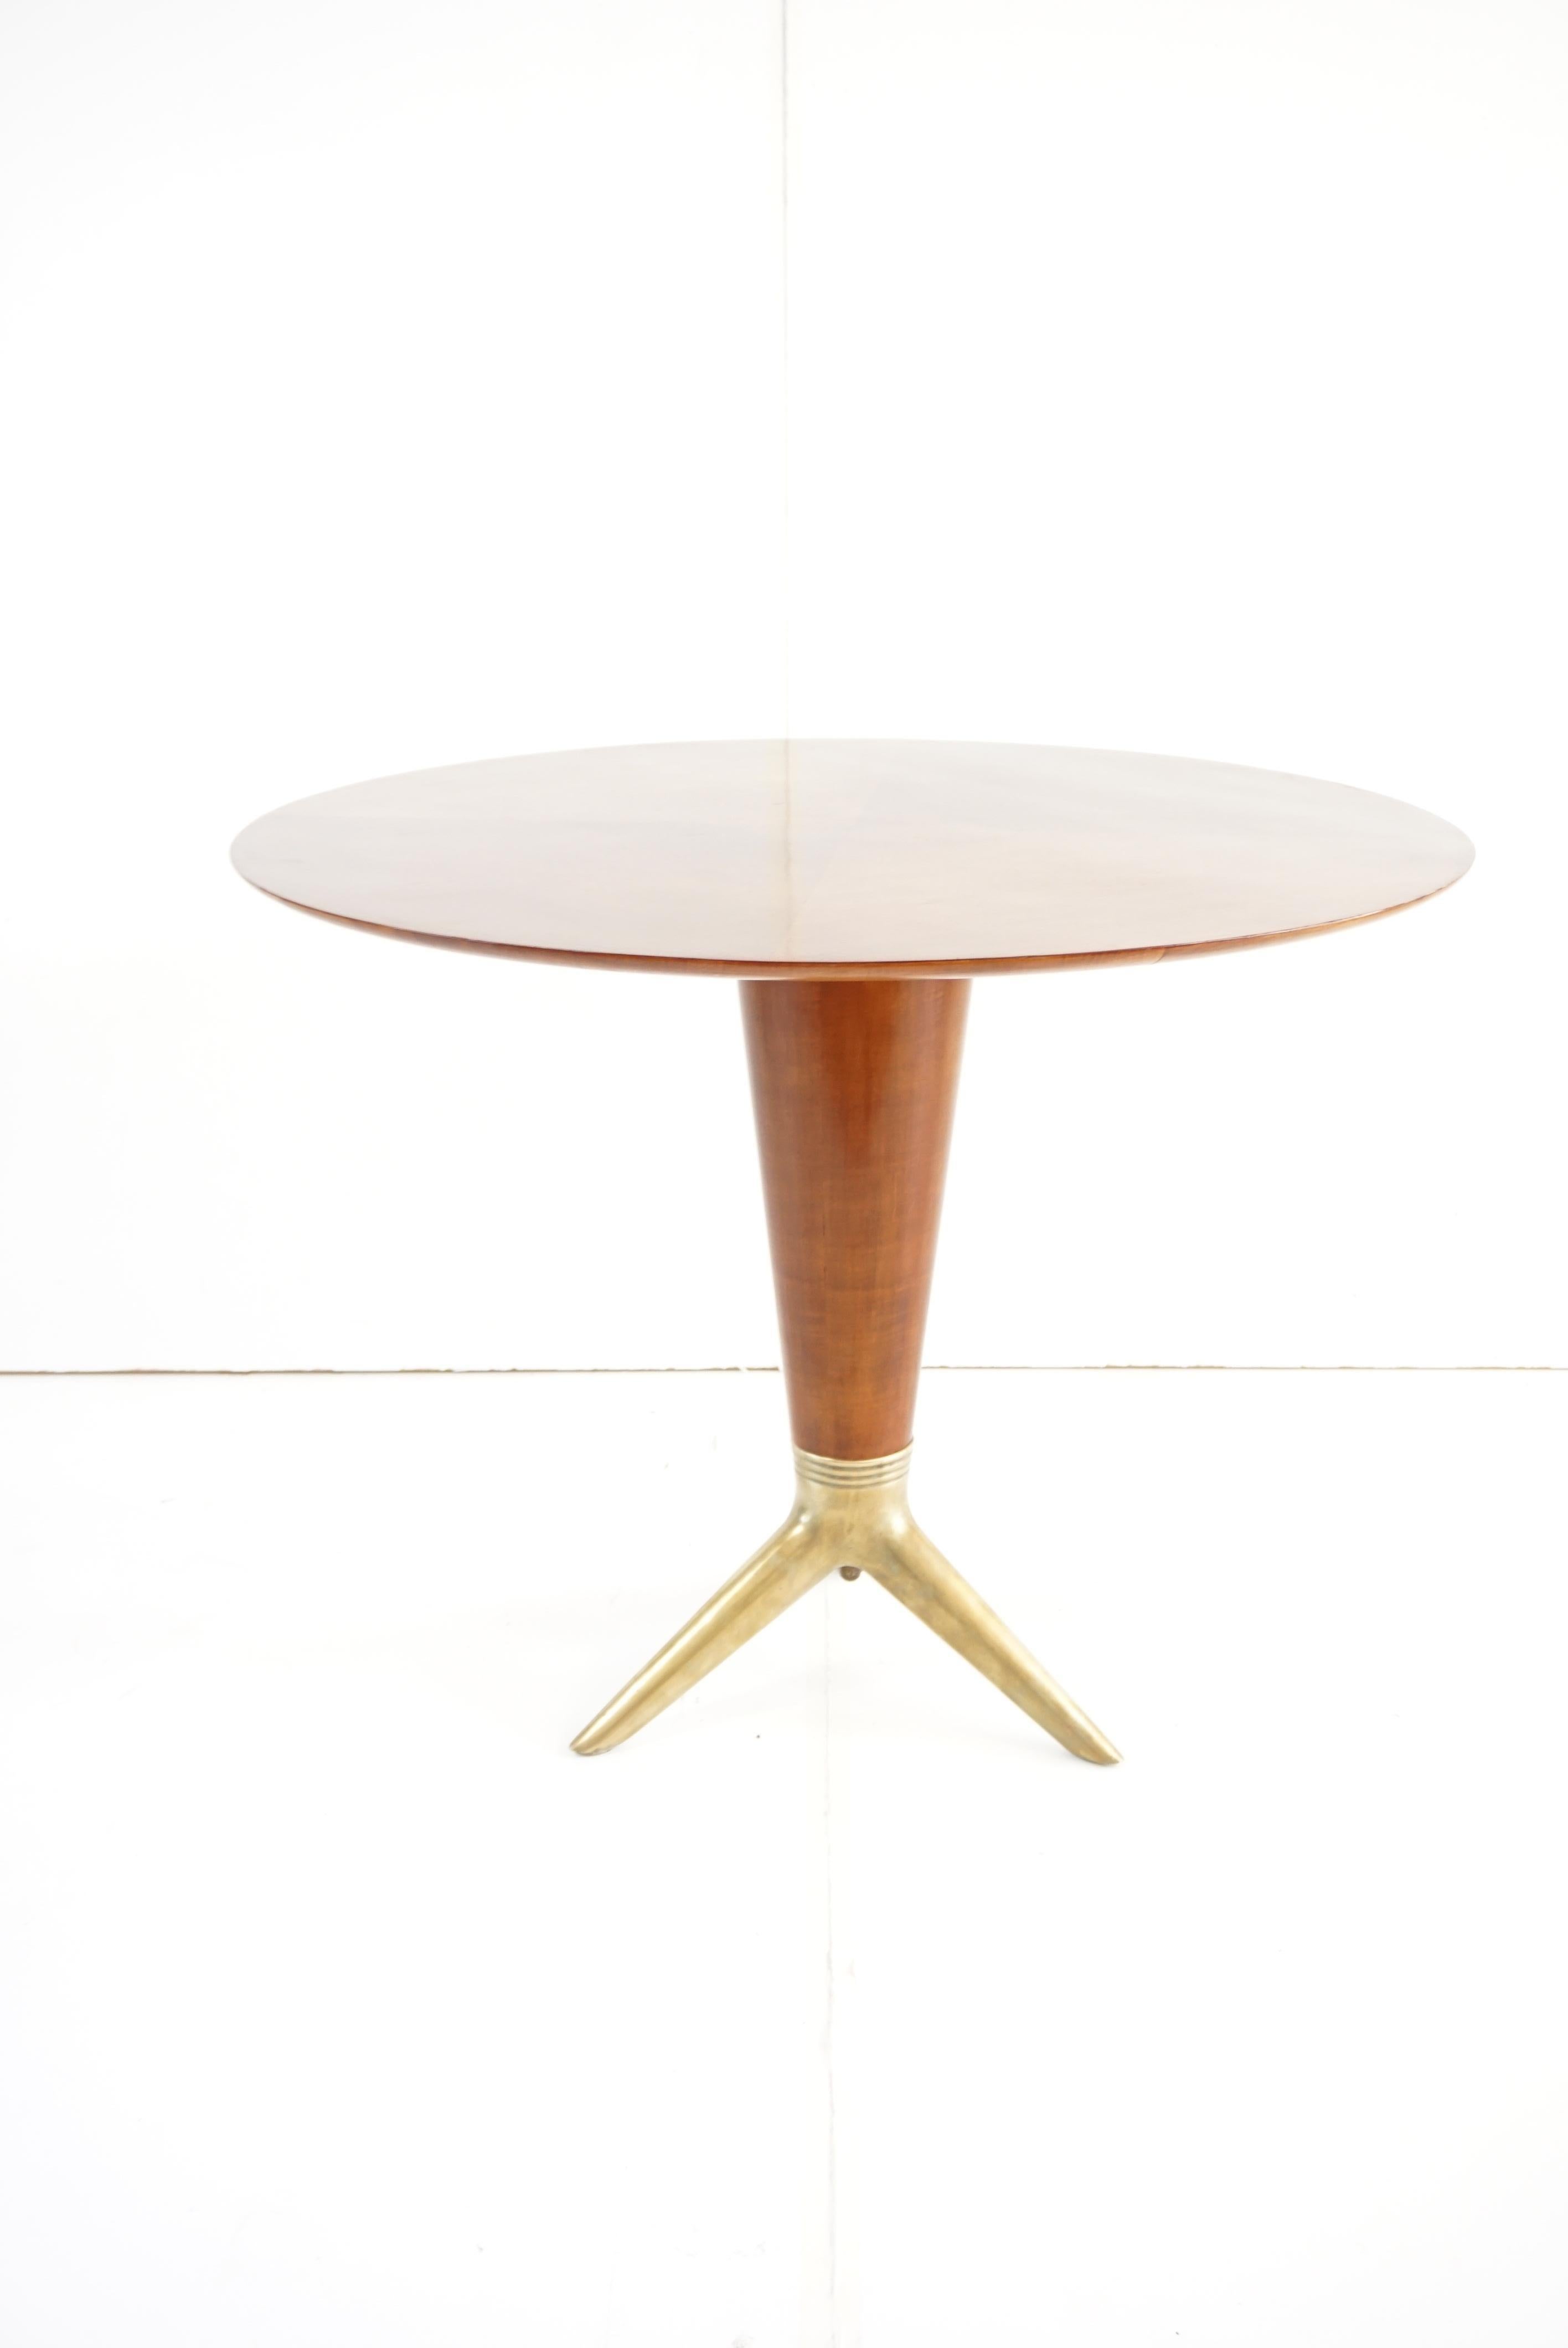 Rare Maple and Brass Round Center Table by I.S.A. Bergamo 1950 For Sale 1